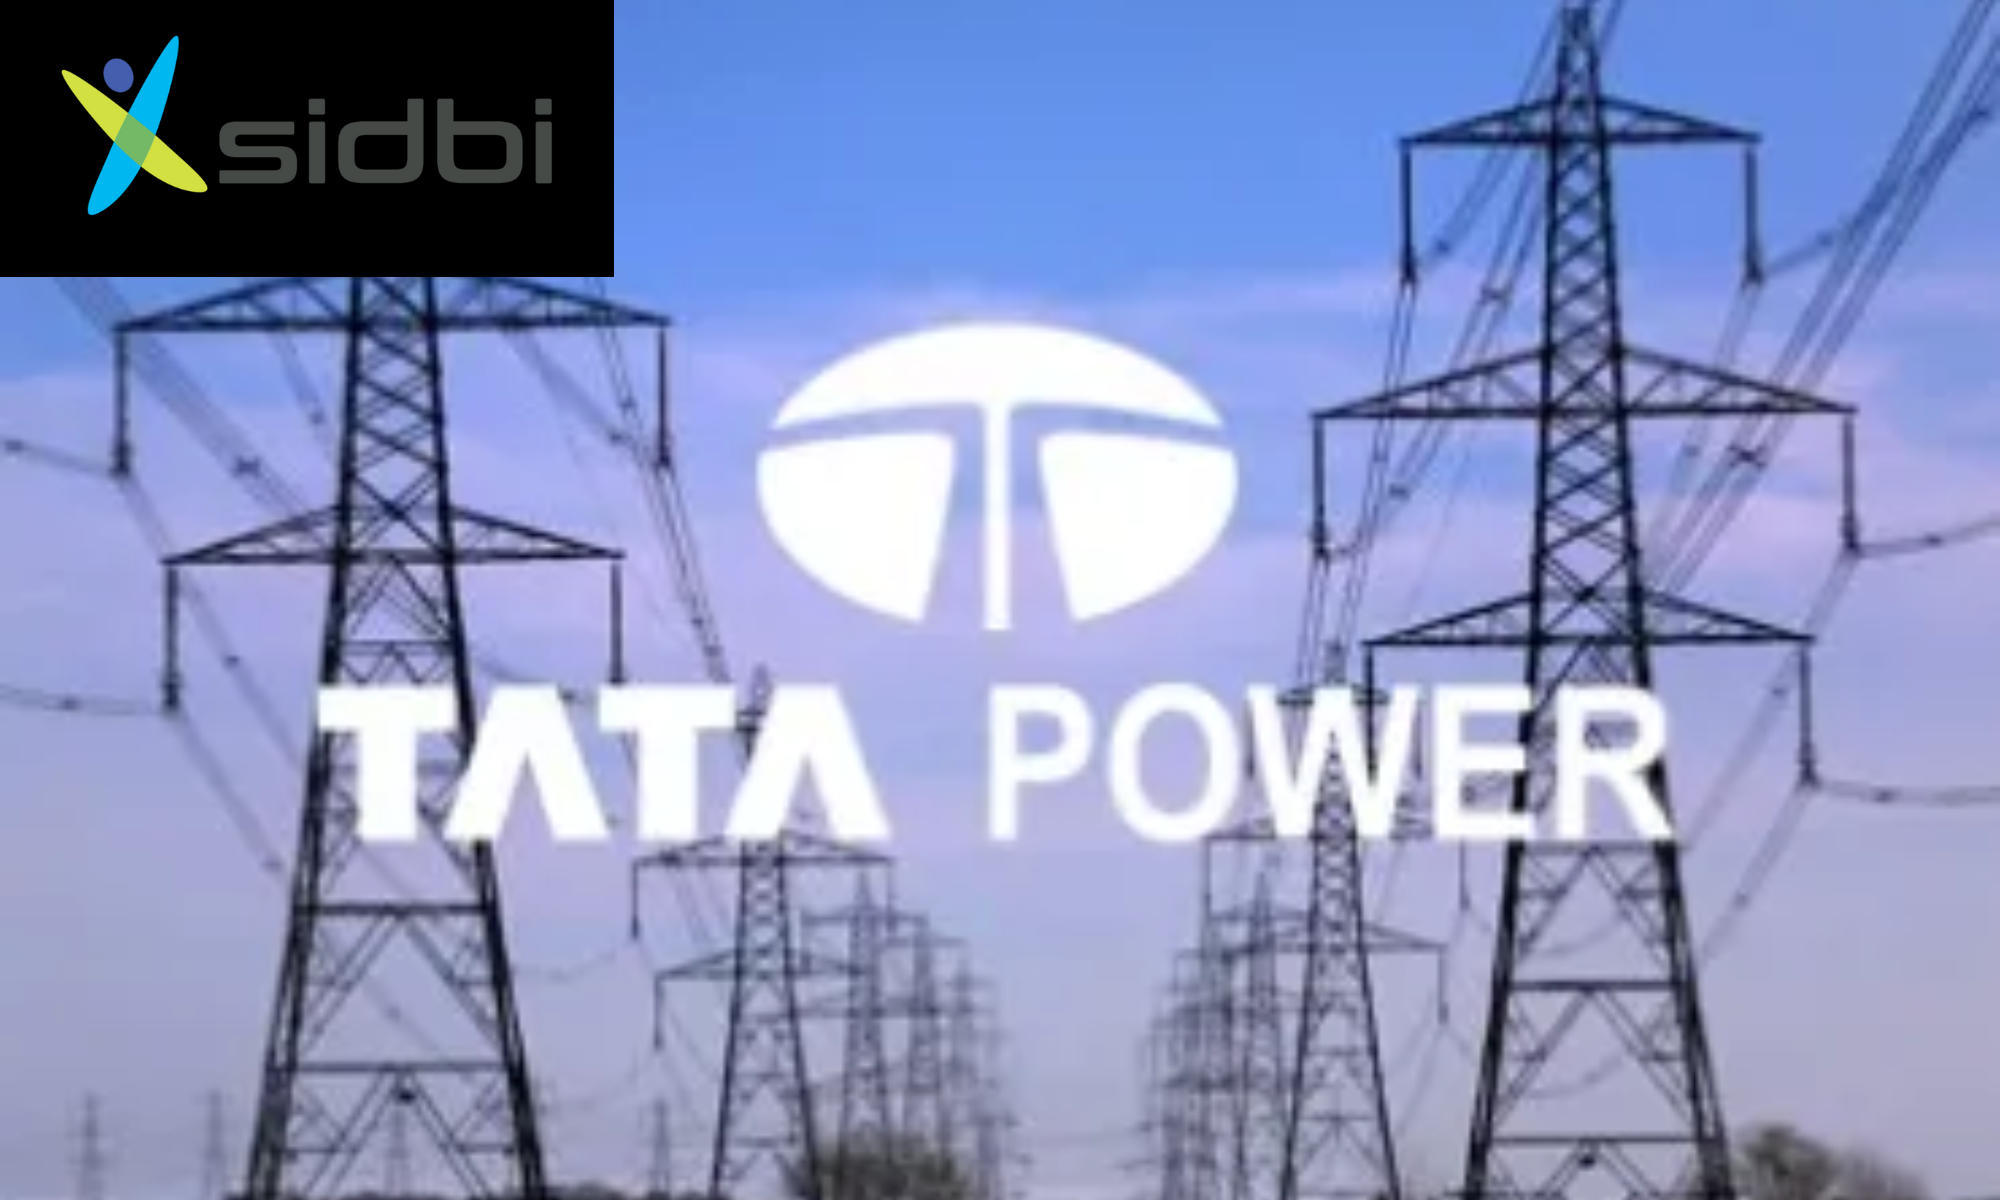 SIDBI and Tata Power’s TPRMG collaborated to support green entrepreneurs